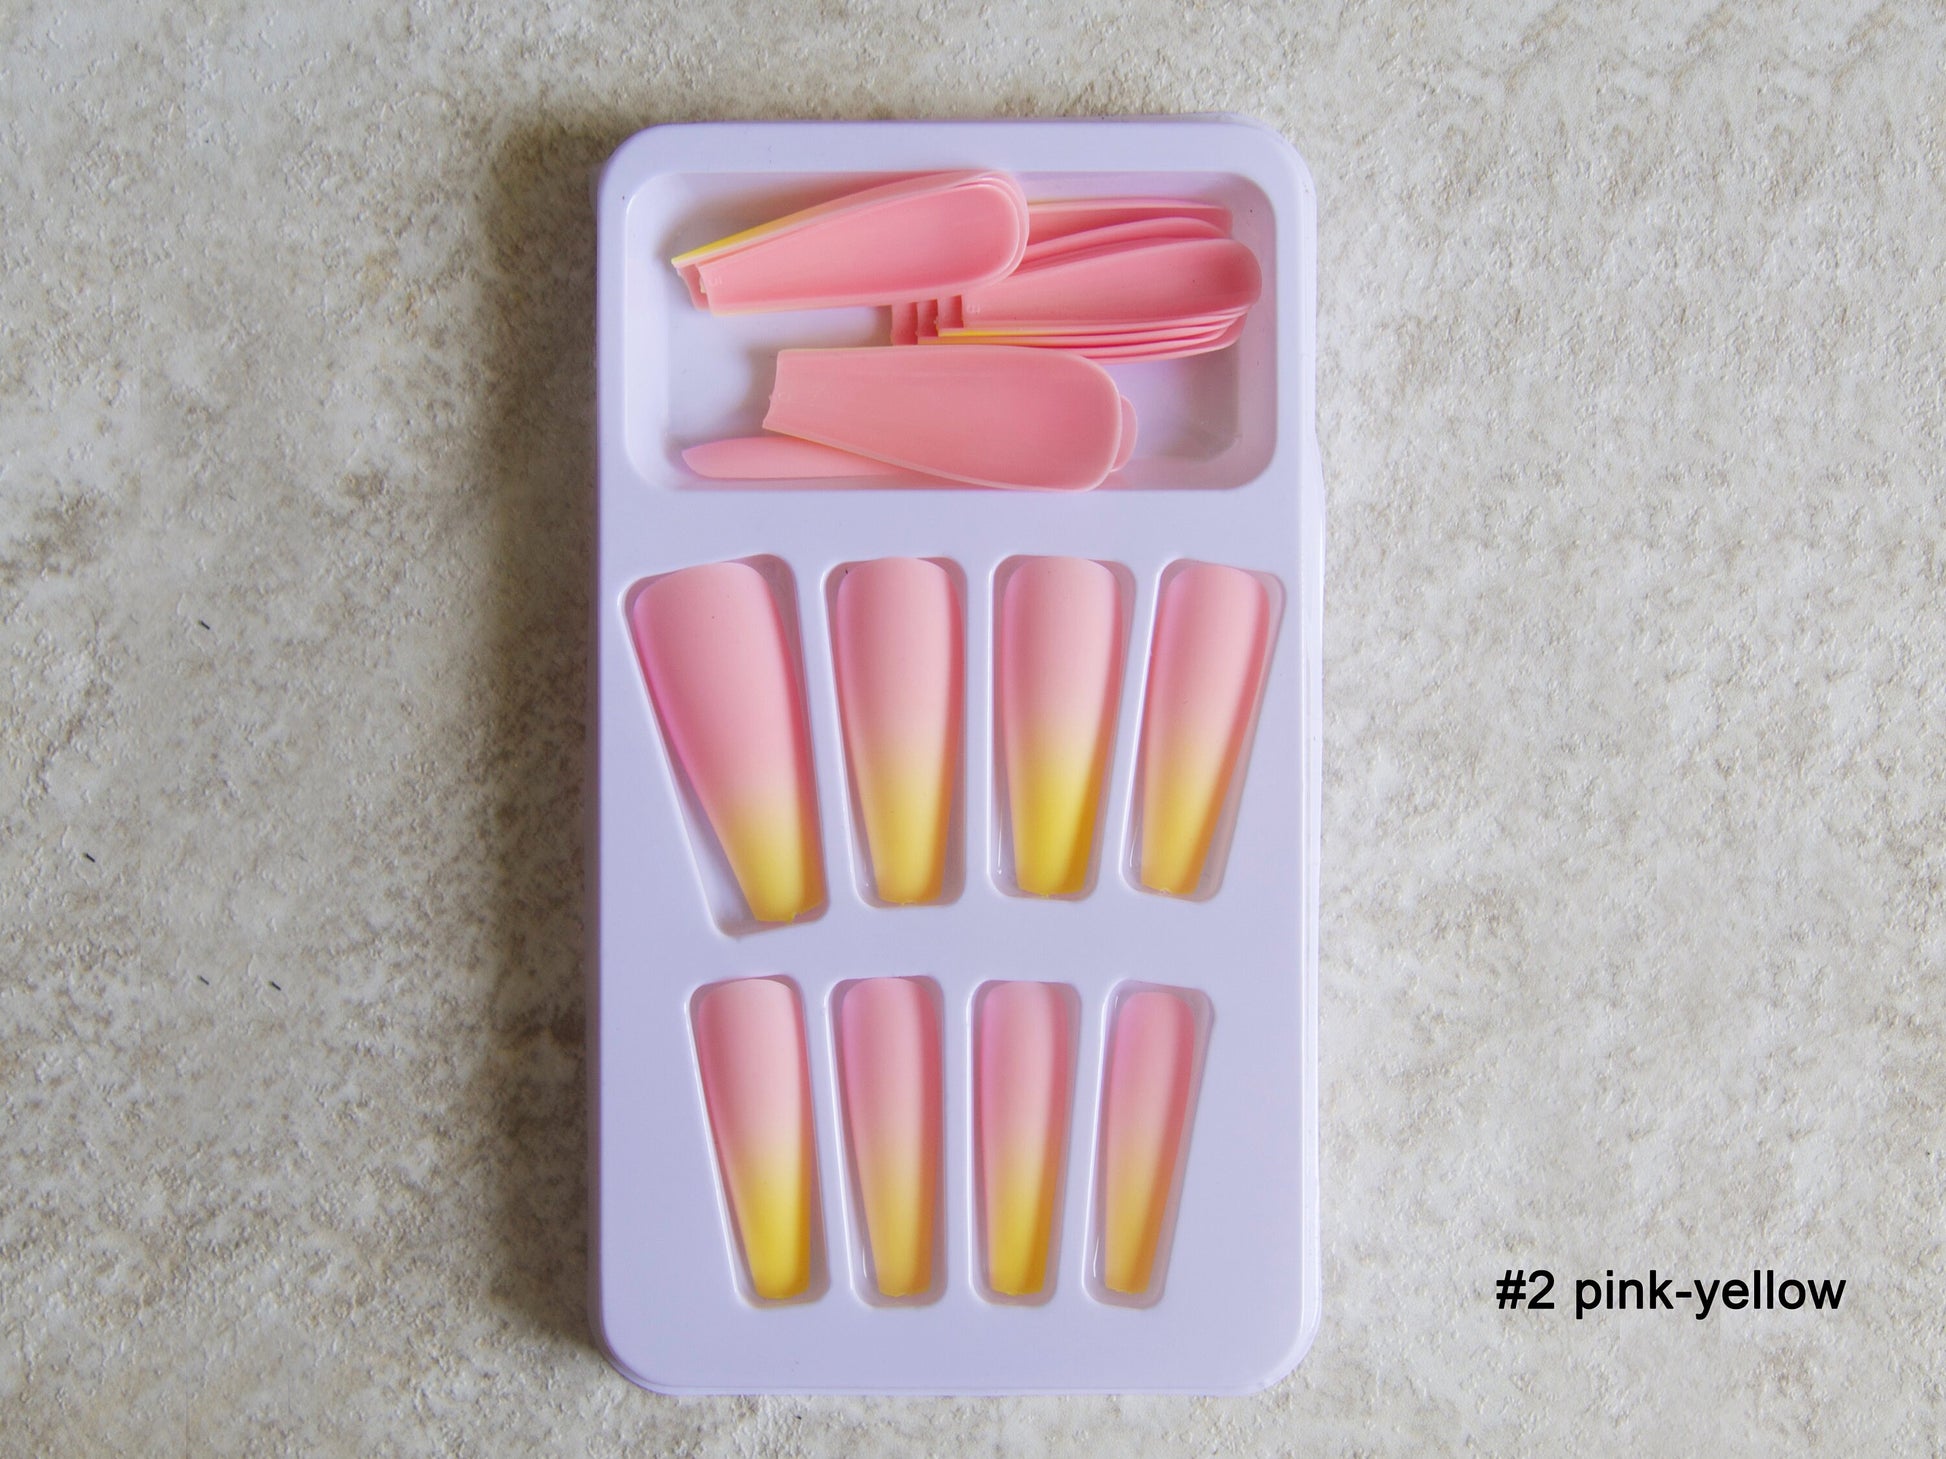 20 pcs Long Coffin Pastel Gradient on Nails/ Full cover Matted Bright Ombre Ready to wear Press ons Tips / Matte Fake Artificial Ins Nails